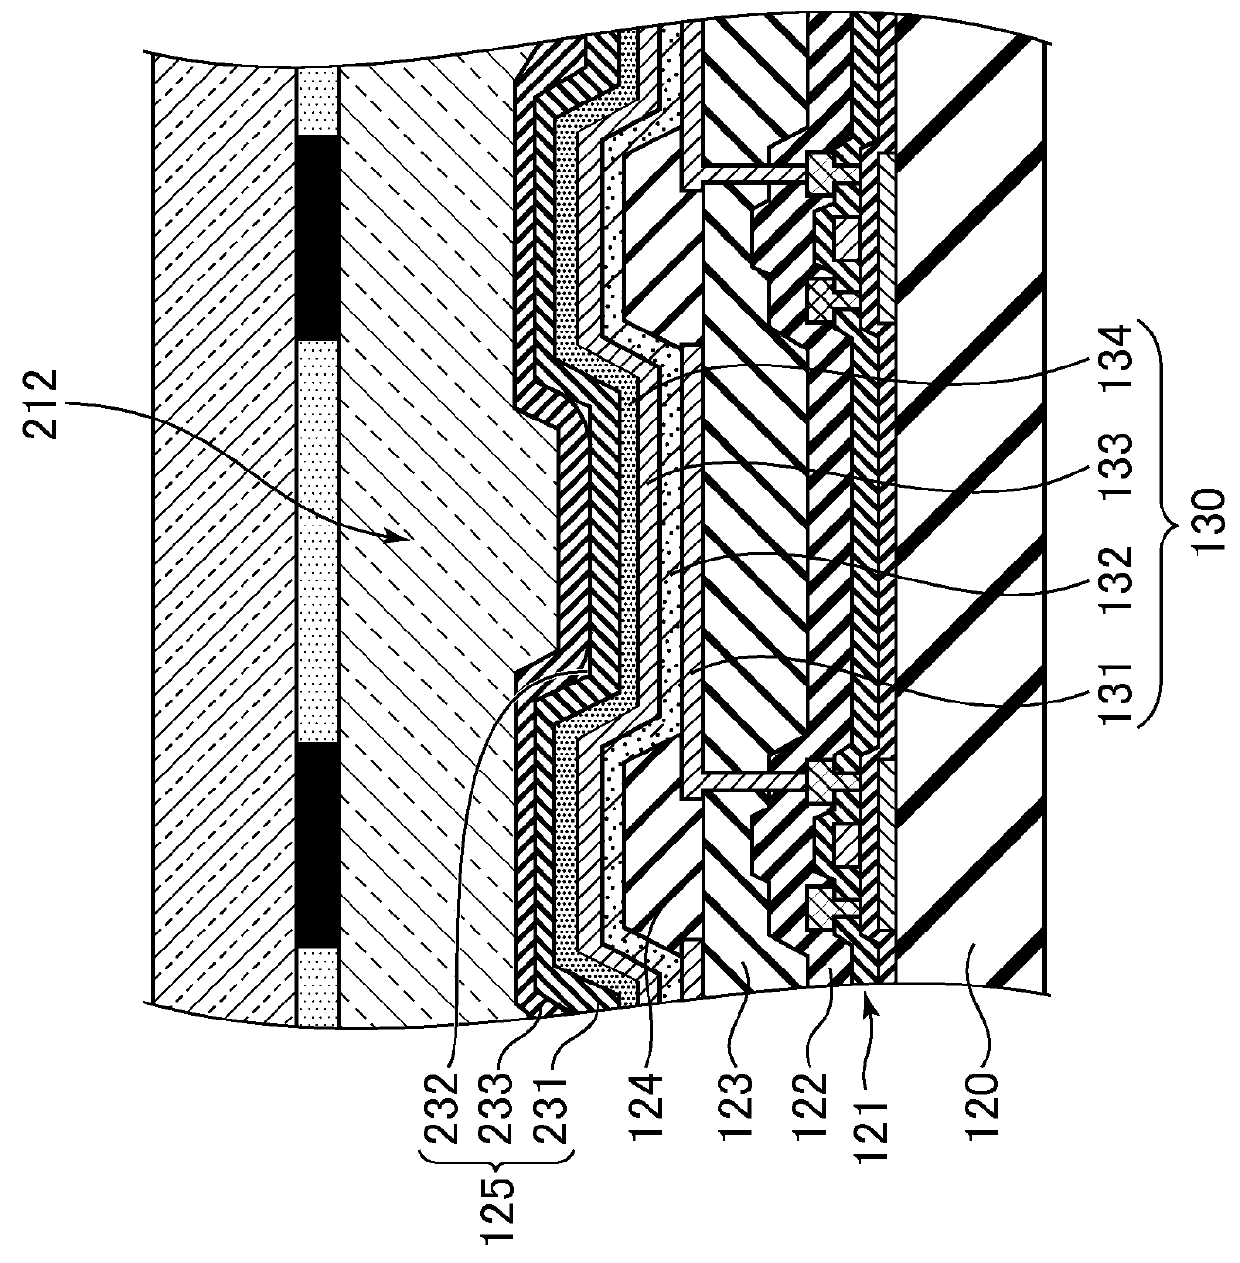 Organic electroluminescence display device having a conductive organic layer in contact with an upper electrode